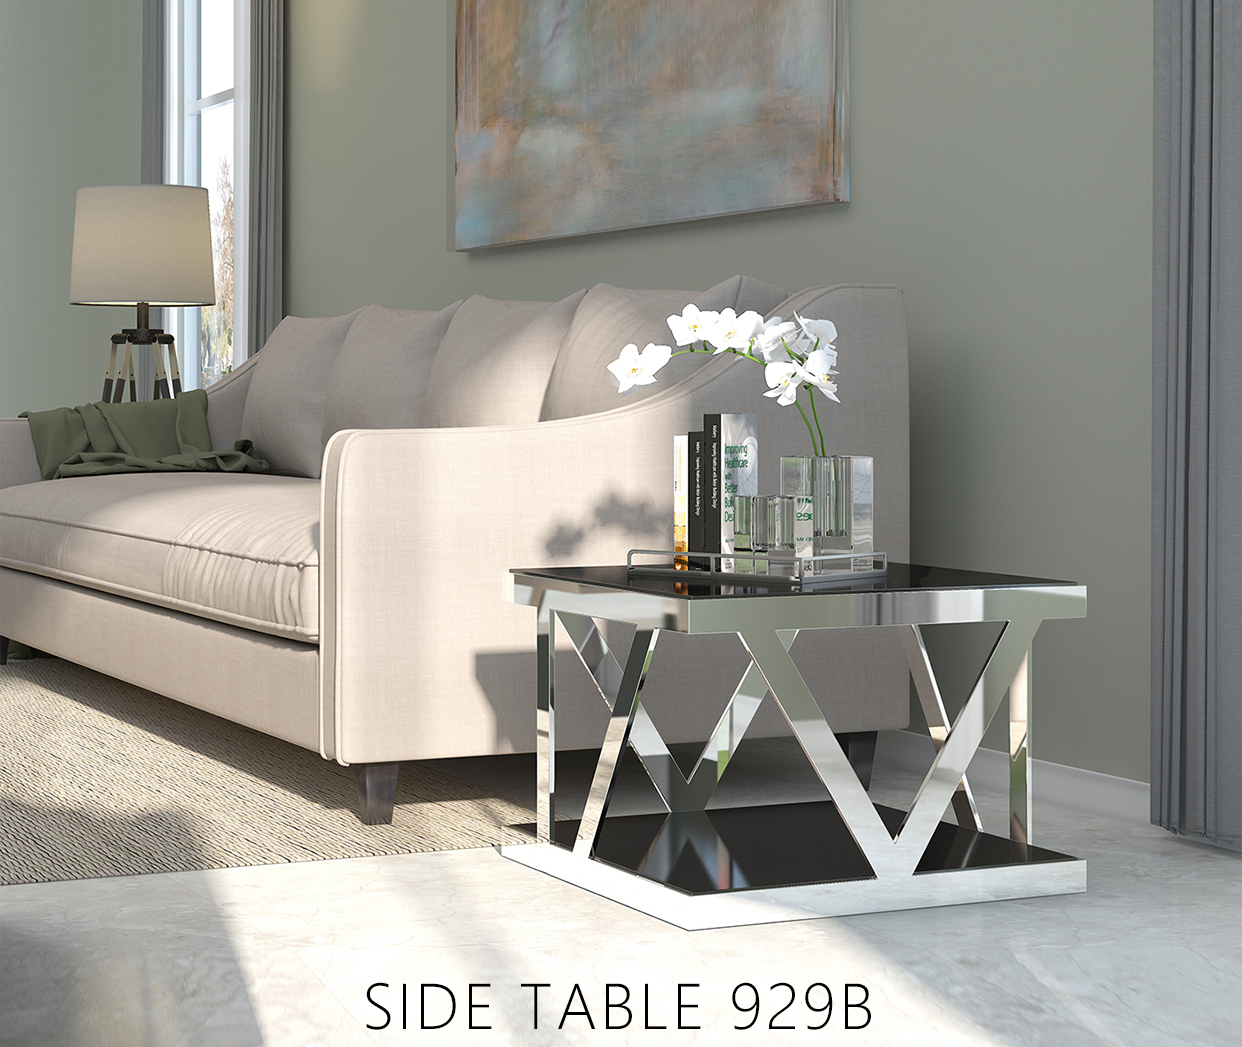 SIDE TABLE 929B